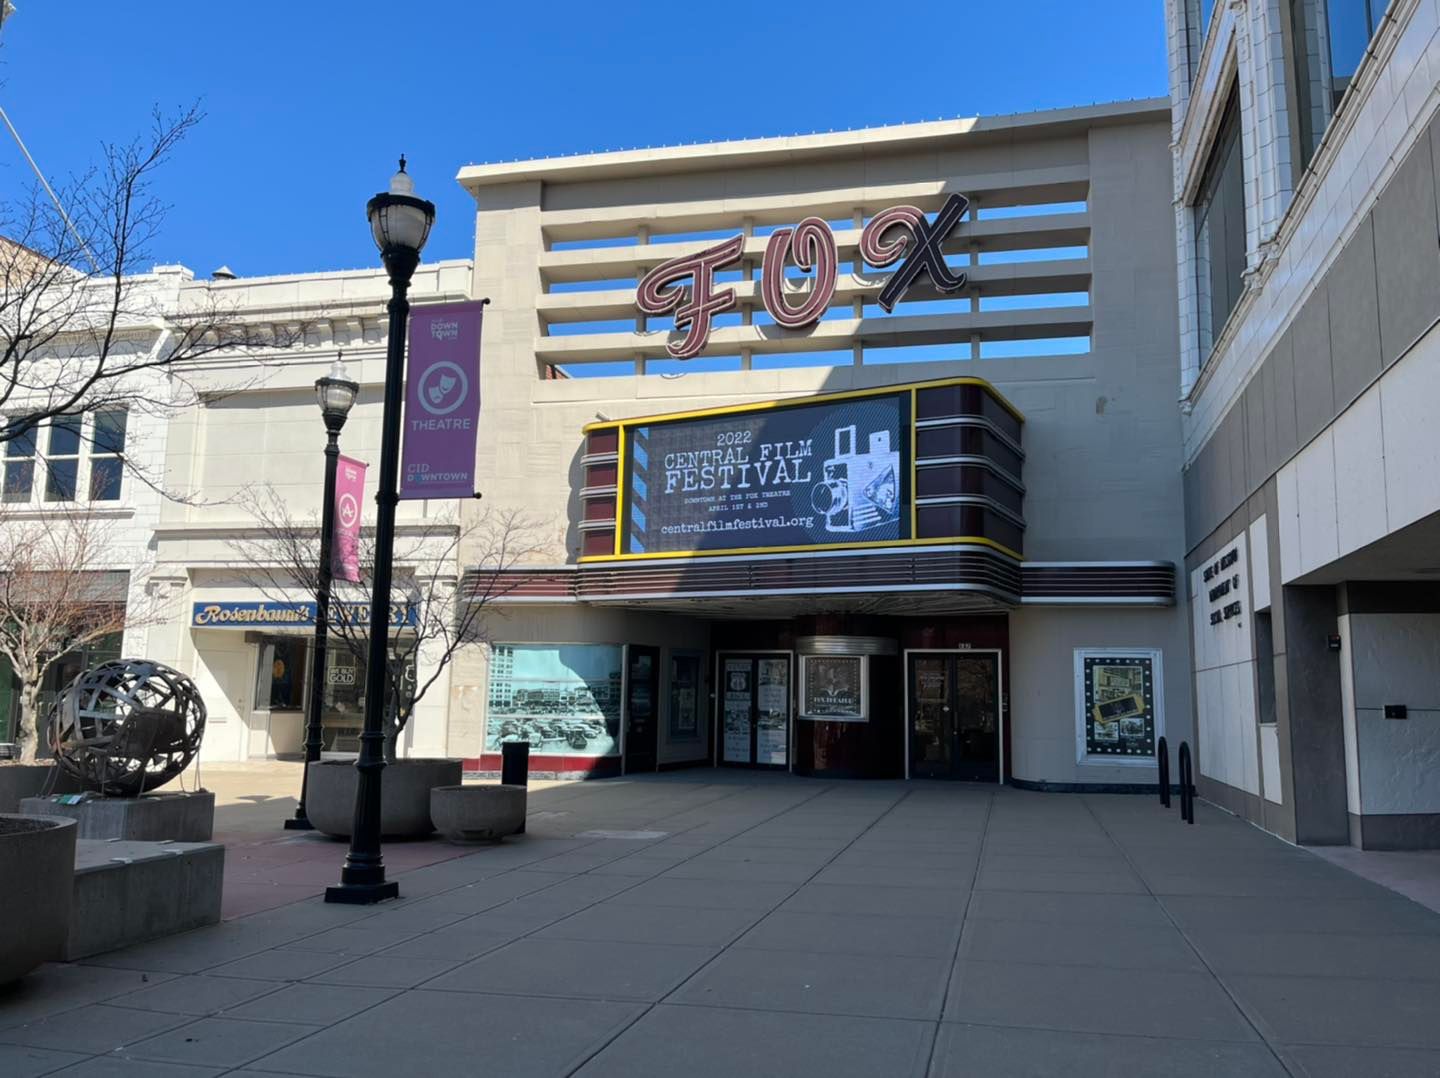 Exterior of the Historic Fox Theatre in downtown Springfield